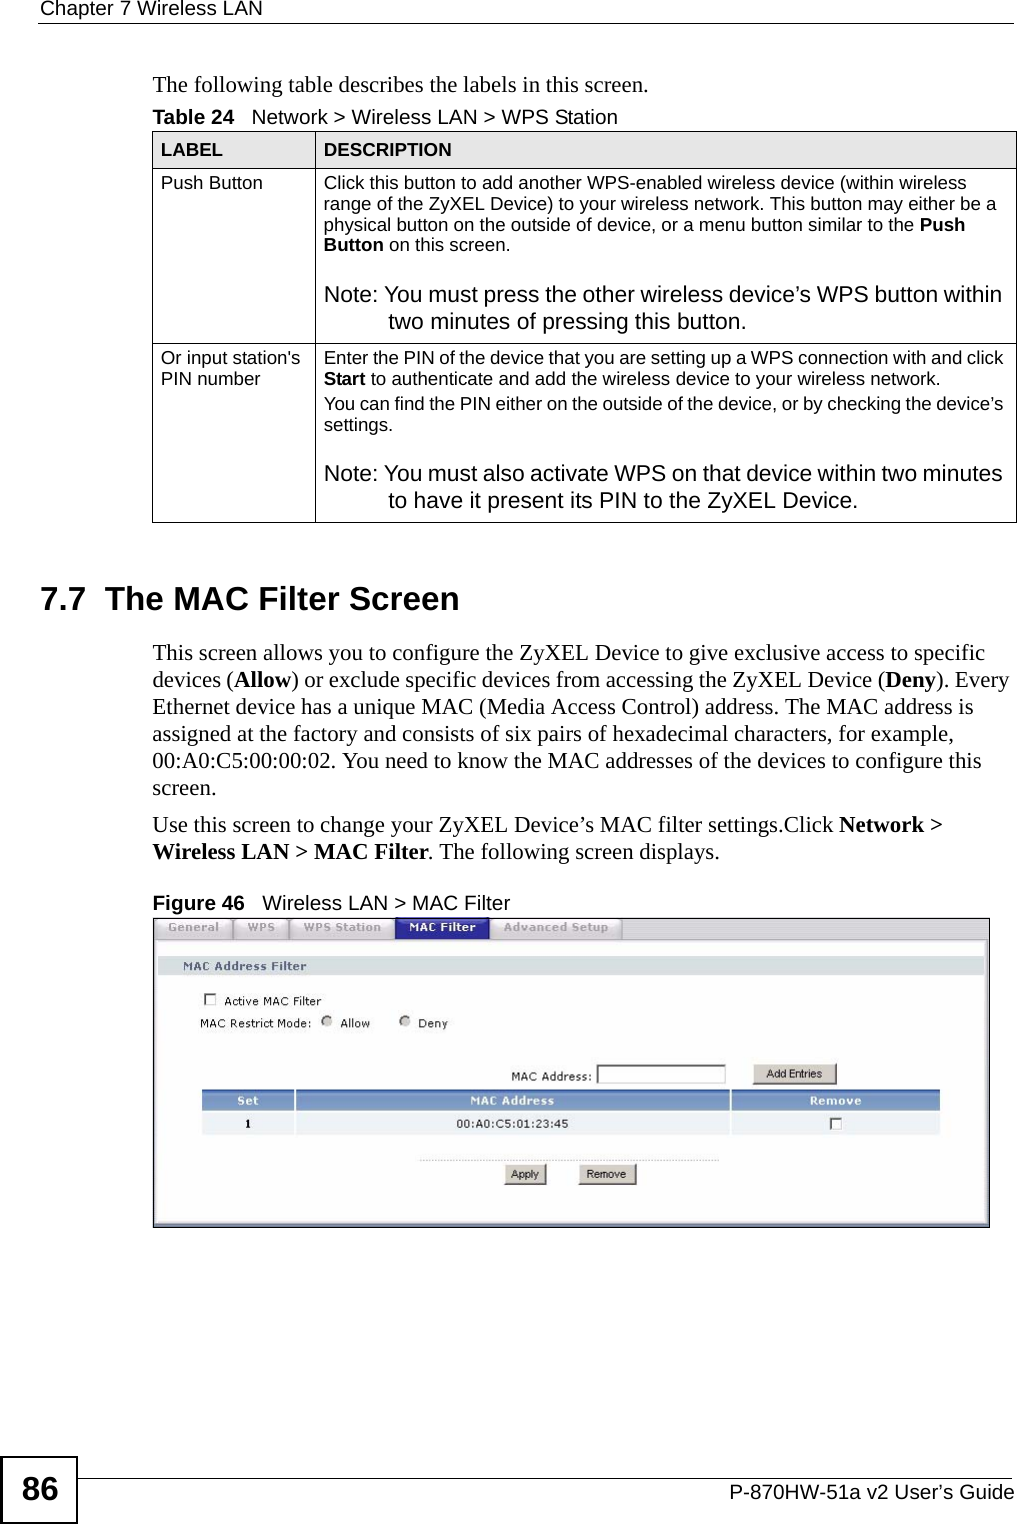 Chapter 7 Wireless LANP-870HW-51a v2 User’s Guide86The following table describes the labels in this screen.7.7  The MAC Filter Screen     This screen allows you to configure the ZyXEL Device to give exclusive access to specific devices (Allow) or exclude specific devices from accessing the ZyXEL Device (Deny). Every Ethernet device has a unique MAC (Media Access Control) address. The MAC address is assigned at the factory and consists of six pairs of hexadecimal characters, for example, 00:A0:C5:00:00:02. You need to know the MAC addresses of the devices to configure this screen.Use this screen to change your ZyXEL Device’s MAC filter settings.Click Network &gt; Wireless LAN &gt; MAC Filter. The following screen displays.Figure 46   Wireless LAN &gt; MAC FilterTable 24   Network &gt; Wireless LAN &gt; WPS StationLABEL DESCRIPTIONPush Button Click this button to add another WPS-enabled wireless device (within wireless range of the ZyXEL Device) to your wireless network. This button may either be a physical button on the outside of device, or a menu button similar to the Push Button on this screen.Note: You must press the other wireless device’s WPS button within two minutes of pressing this button.Or input station&apos;s PIN number Enter the PIN of the device that you are setting up a WPS connection with and click Start to authenticate and add the wireless device to your wireless network.You can find the PIN either on the outside of the device, or by checking the device’s settings.Note: You must also activate WPS on that device within two minutes to have it present its PIN to the ZyXEL Device.